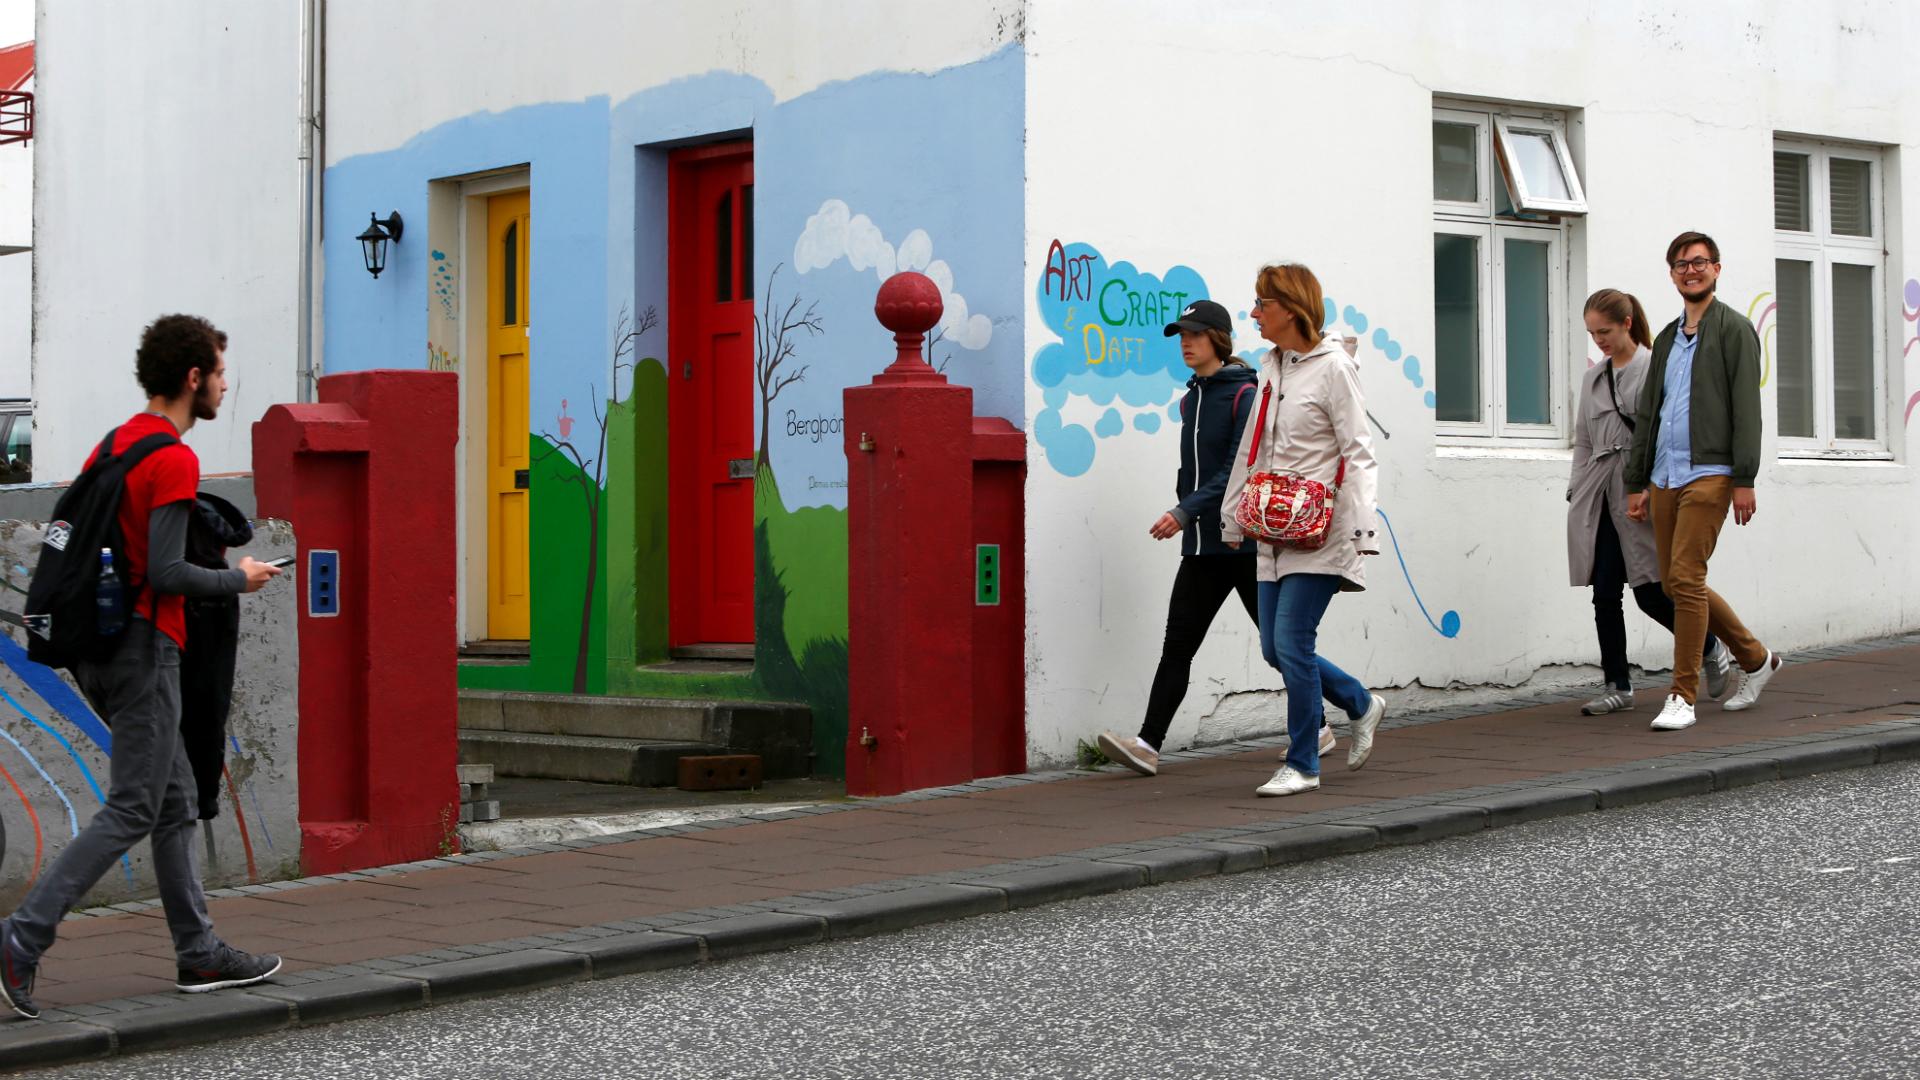 People walk pass pass a colorful house in Reykjavik, Iceland on August 4, 2017. 